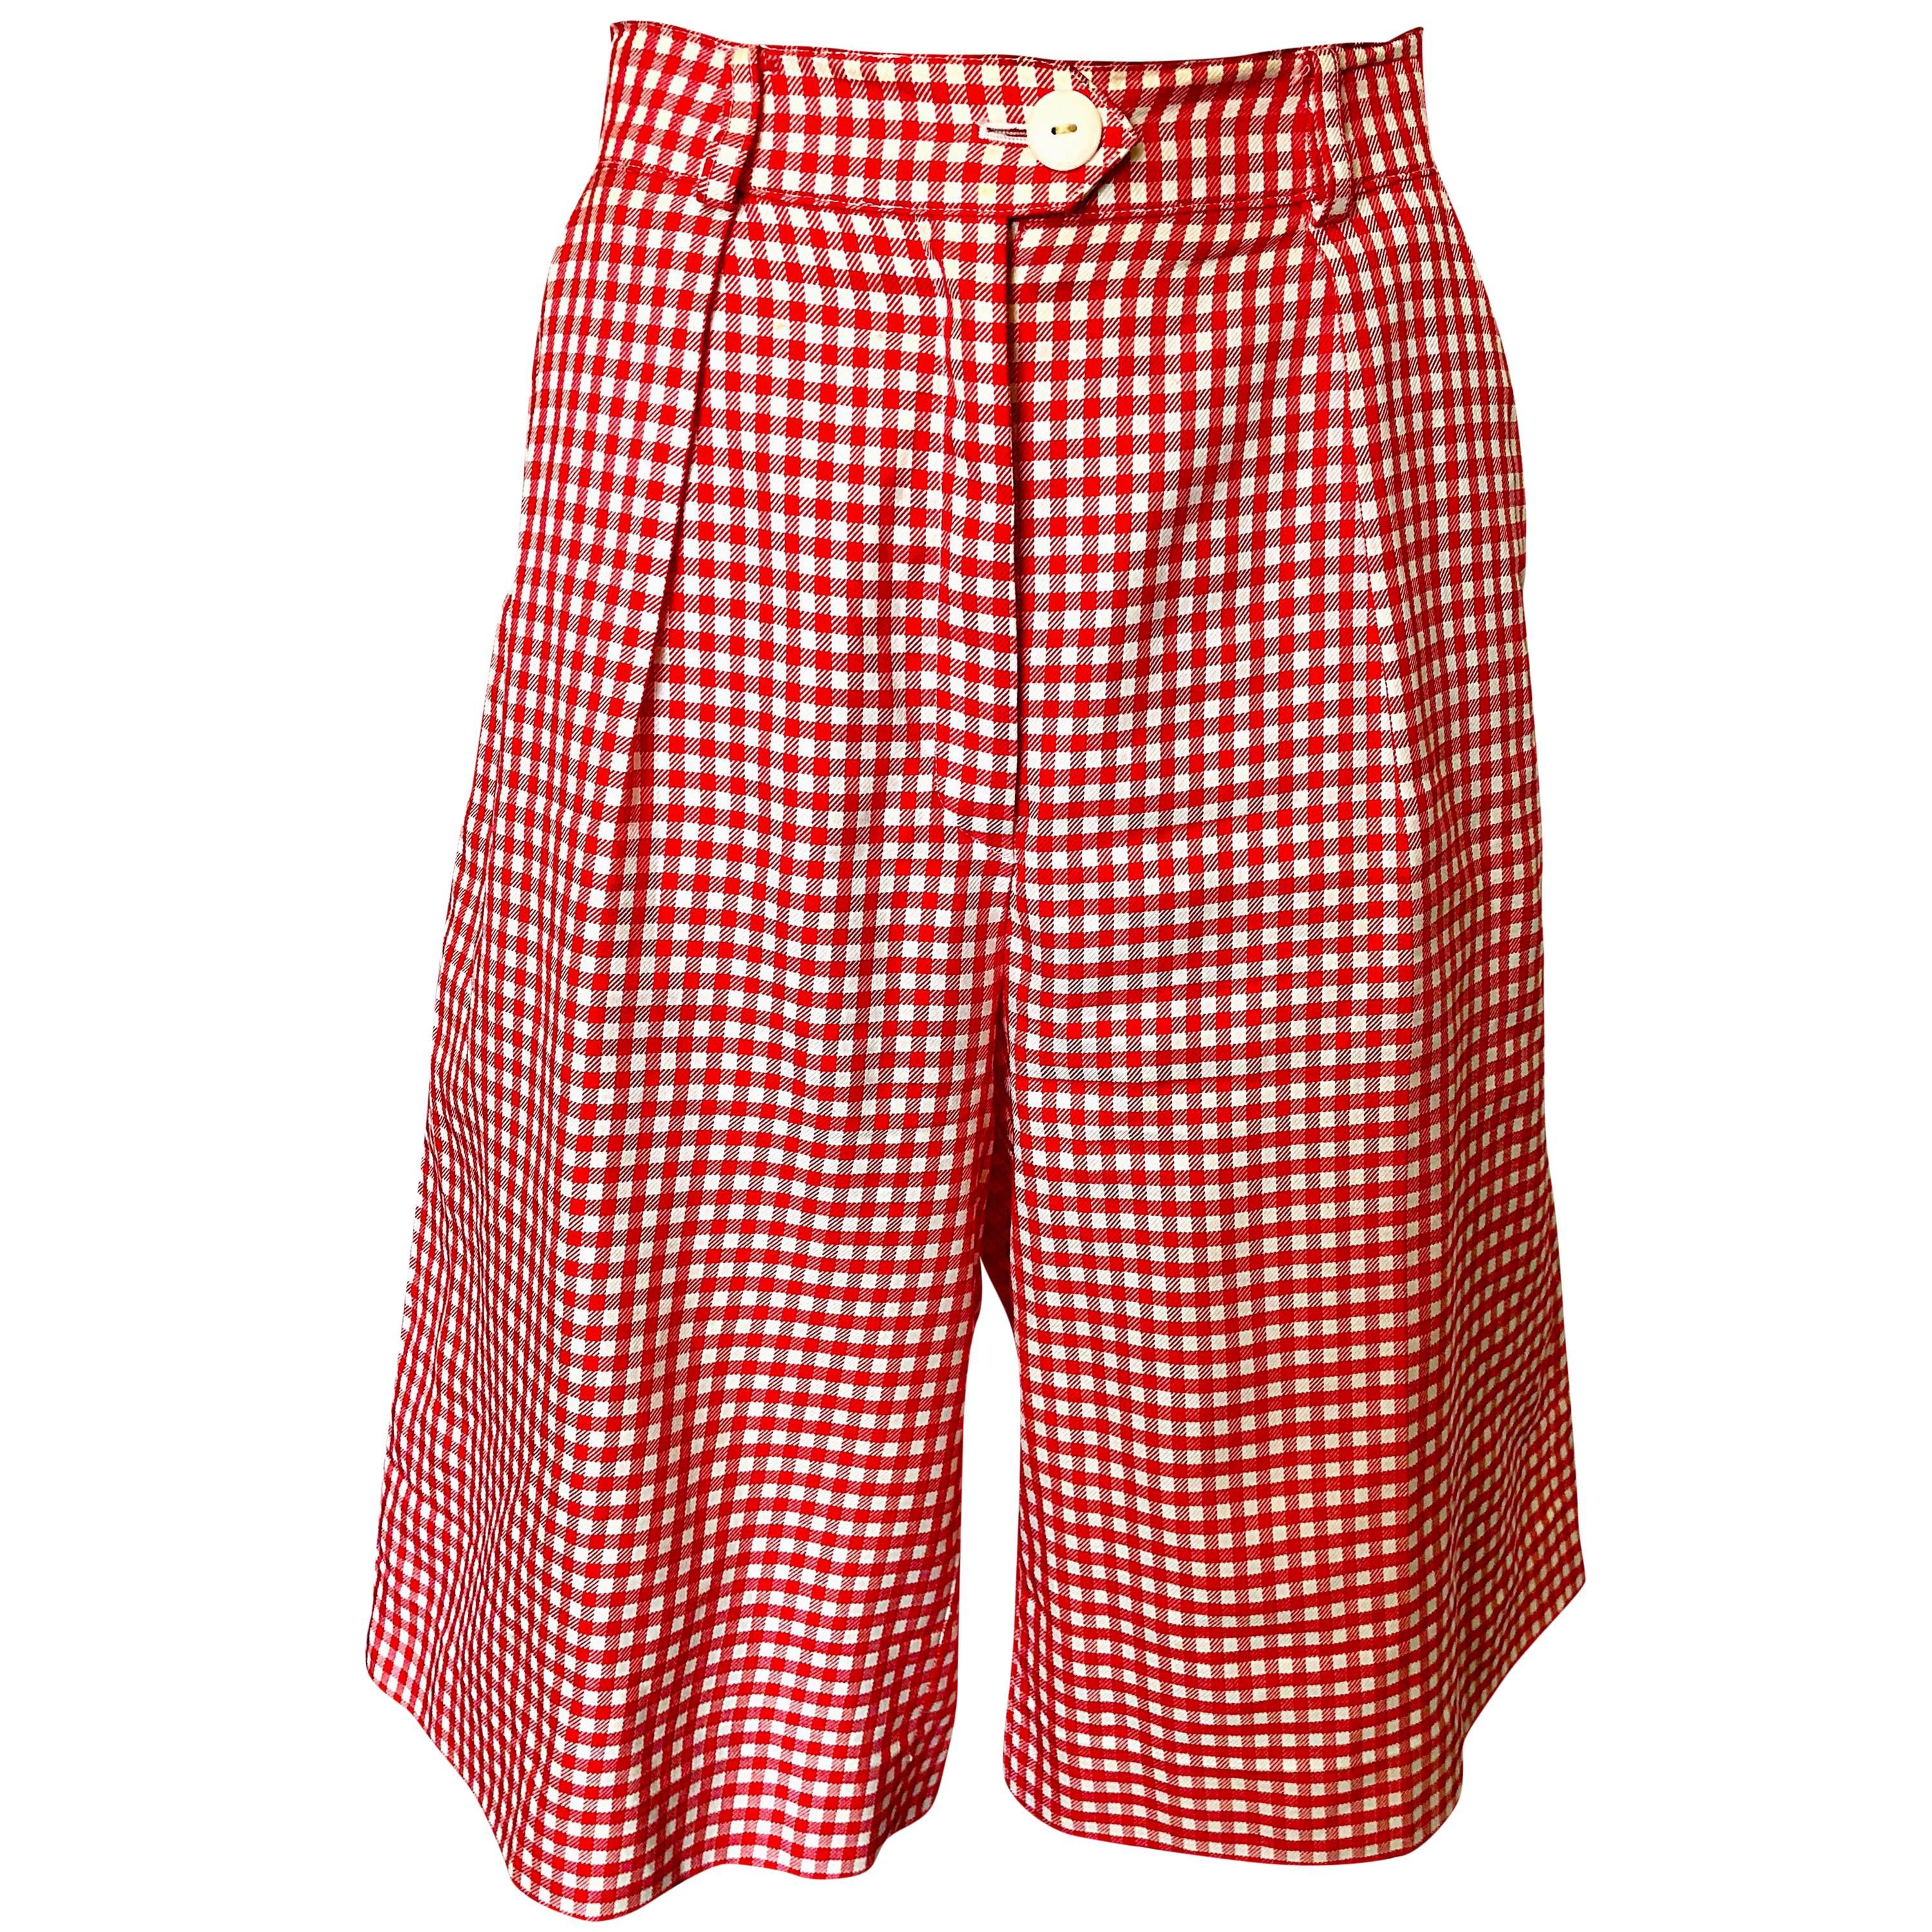 Vintage Escada Margaretha Ley Red White Nautical Gingham 1980s Culottes Shorts For Sale